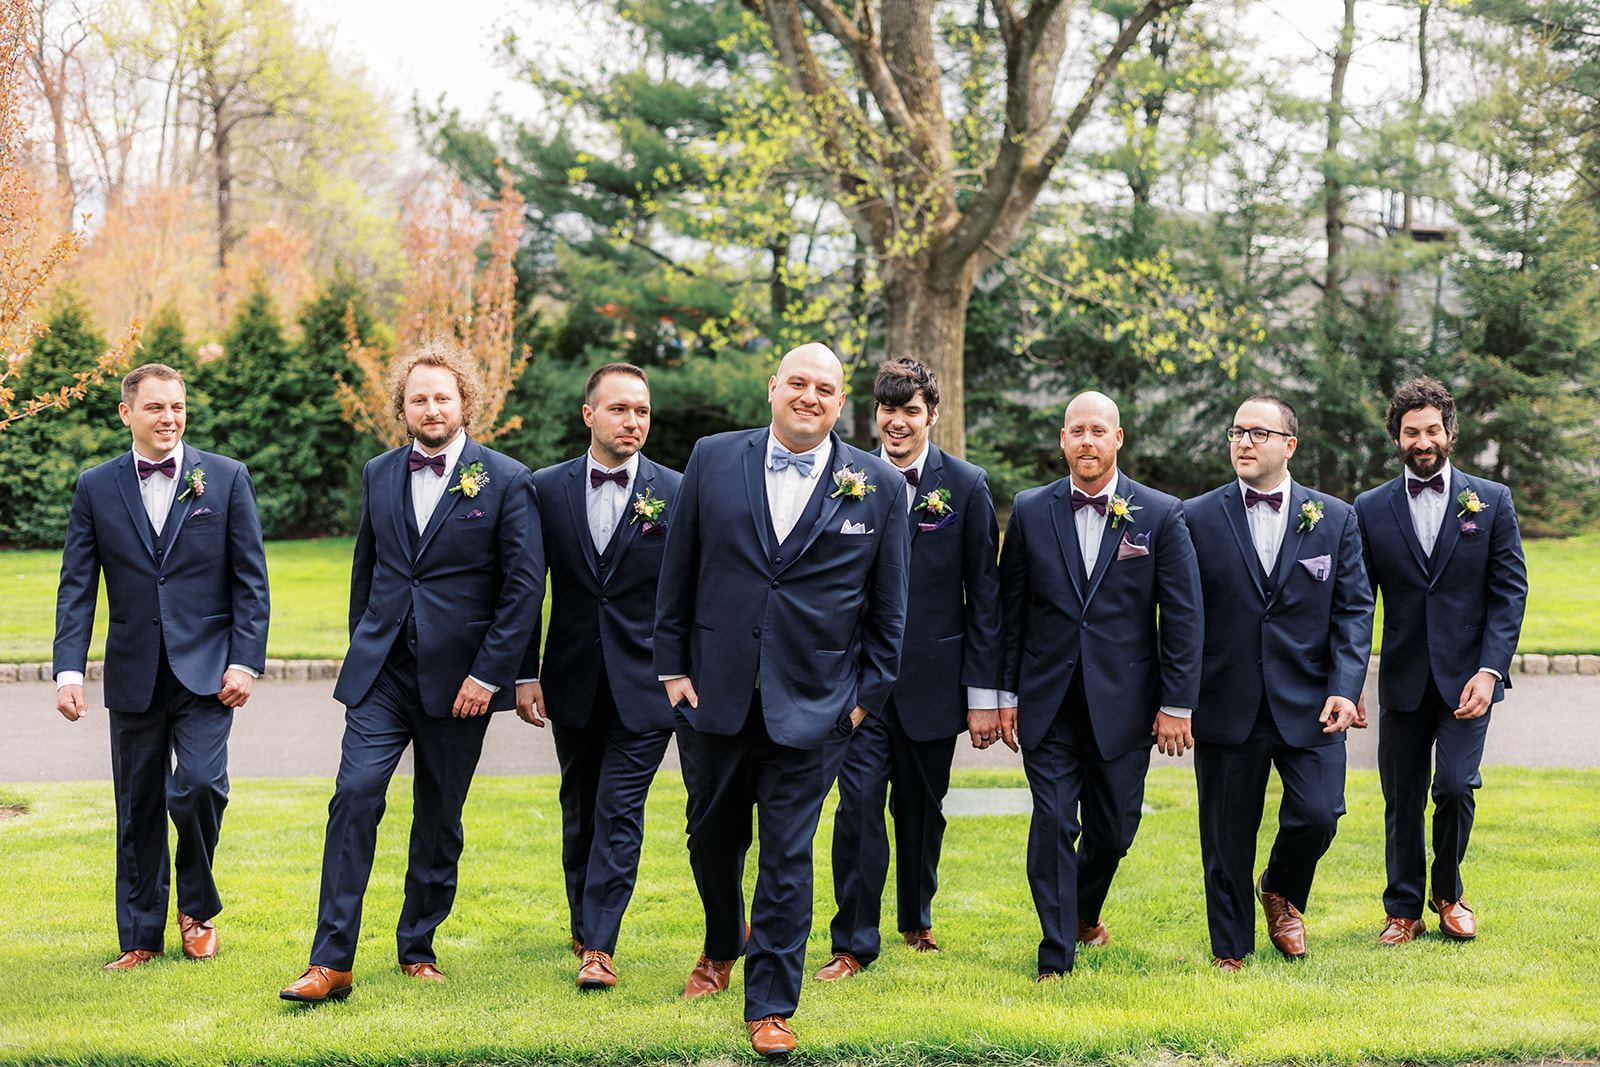 A groom in a blue suit walks with his matching groomsmen through a grassy lawn